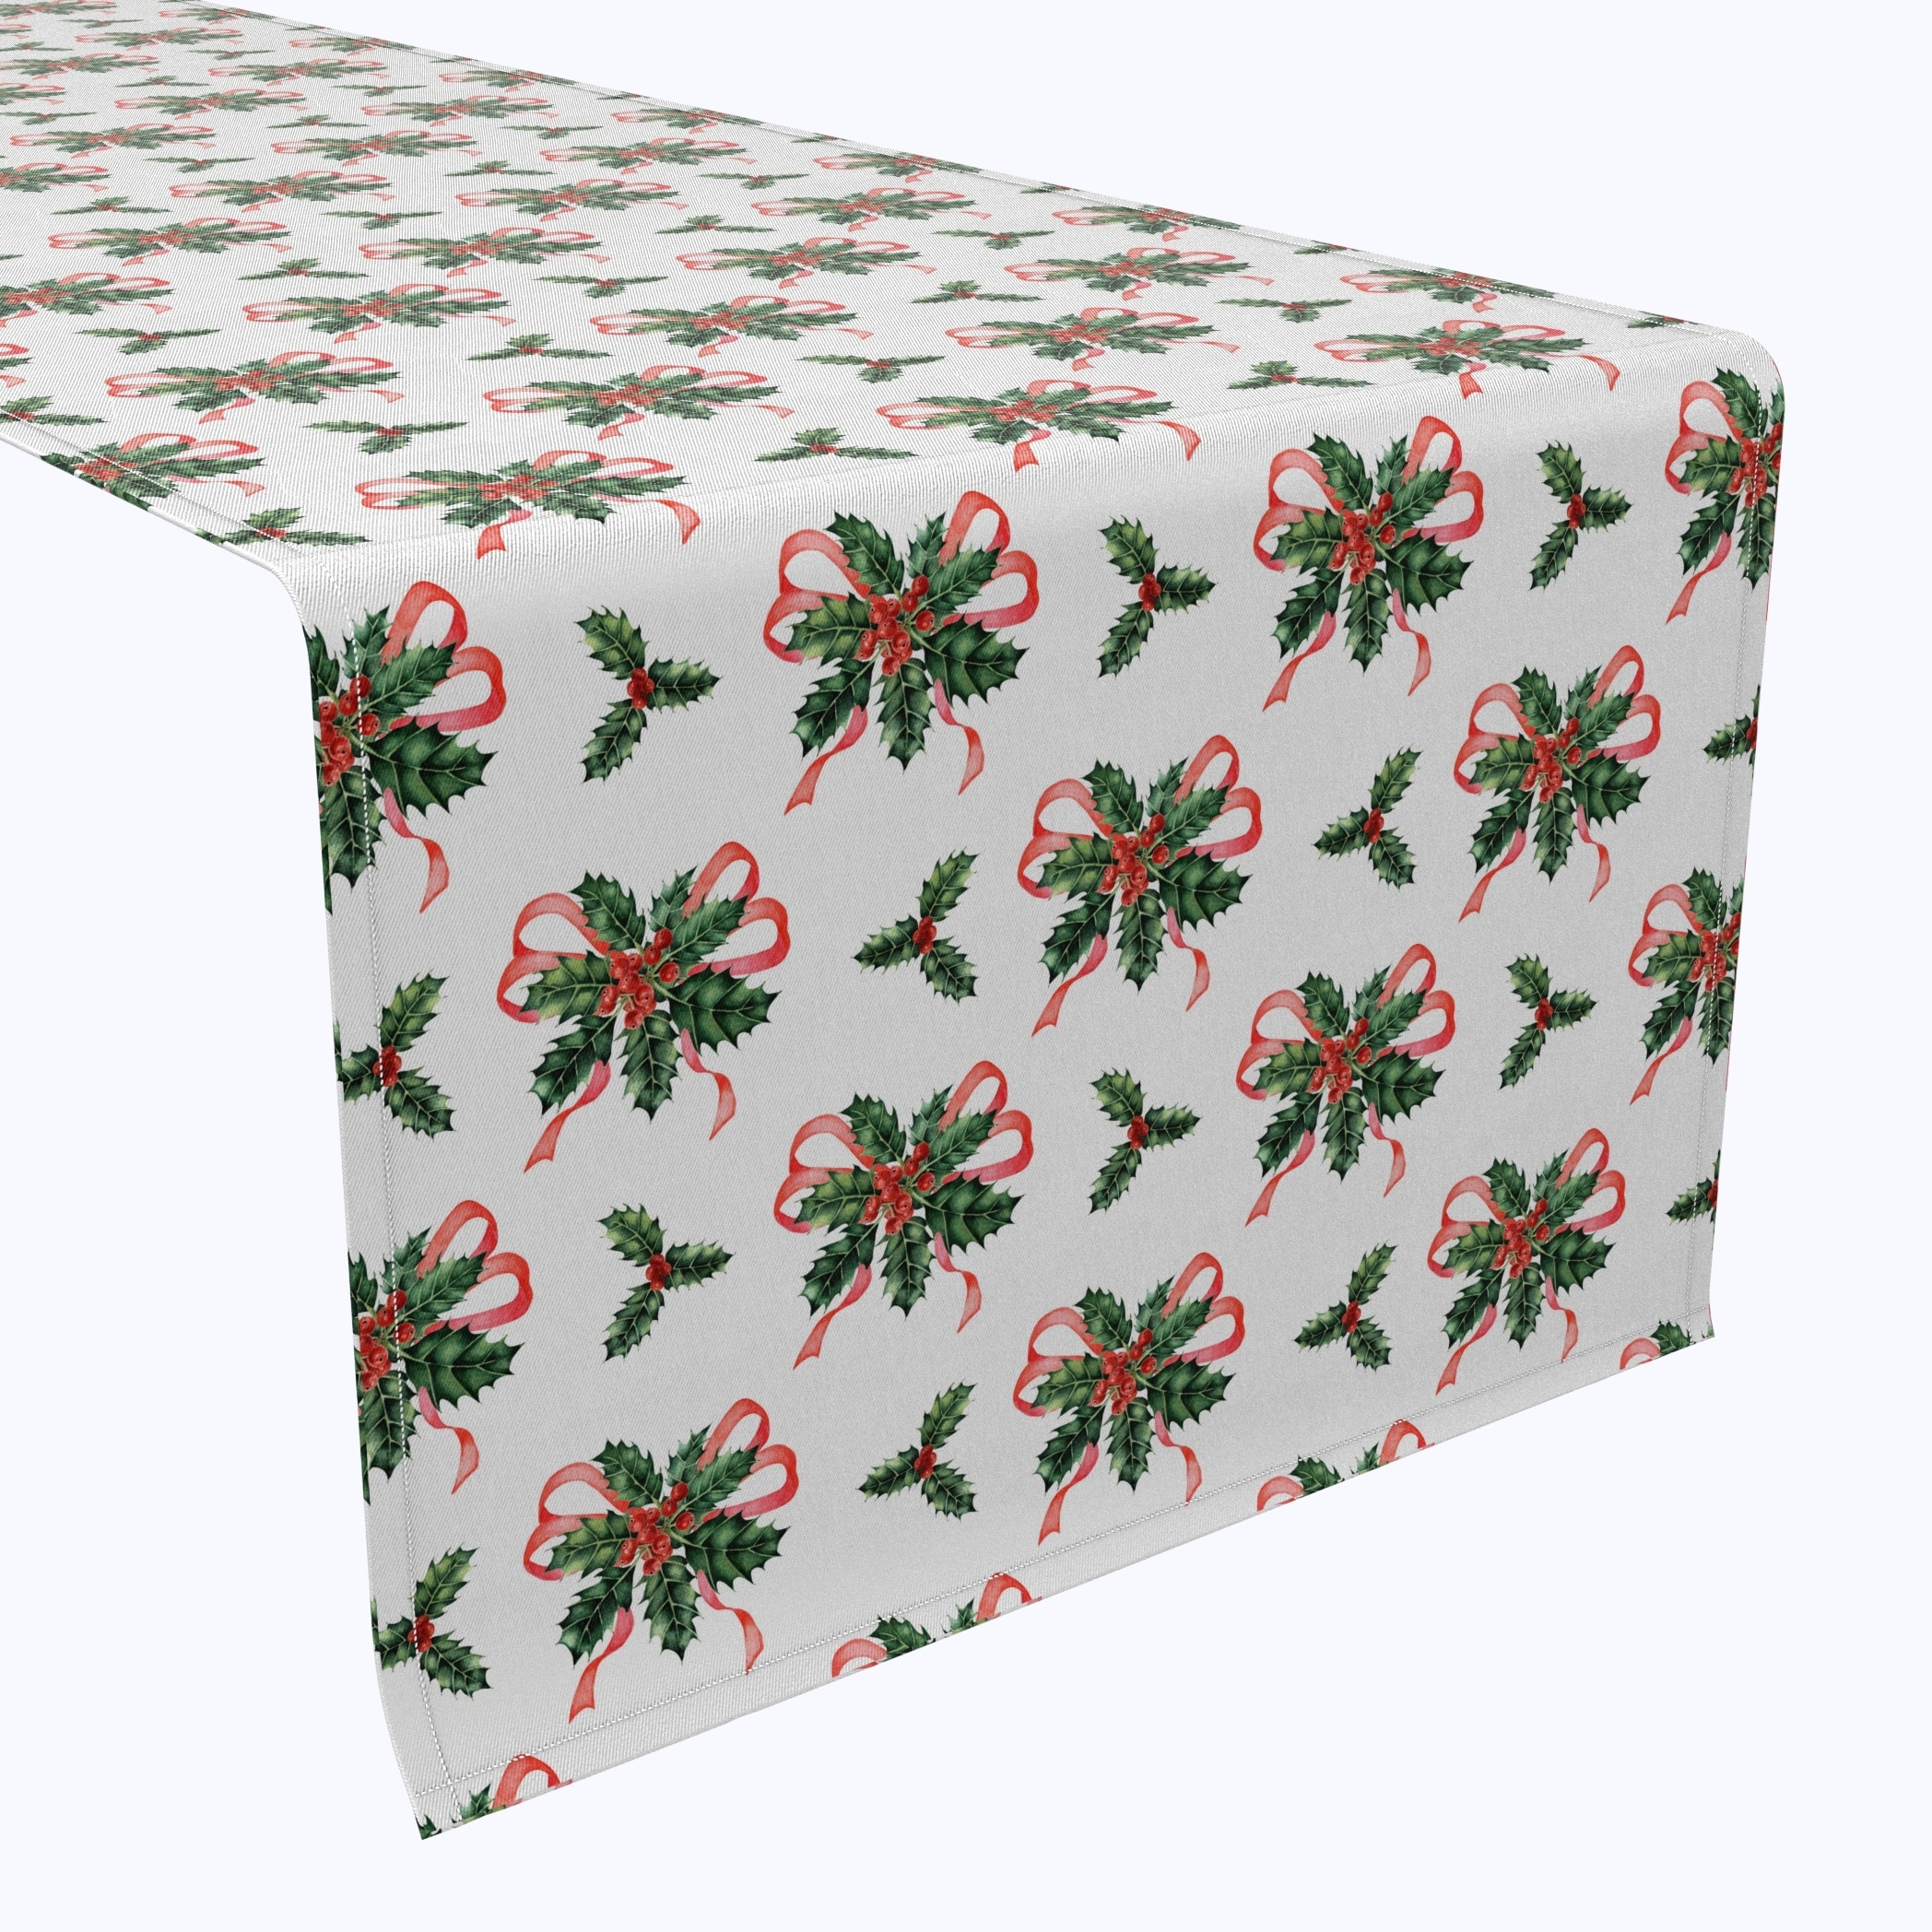 Fabric Textile Products, Inc. Table Runner, 100% Cotton, 16x108", Holly and Ribbons